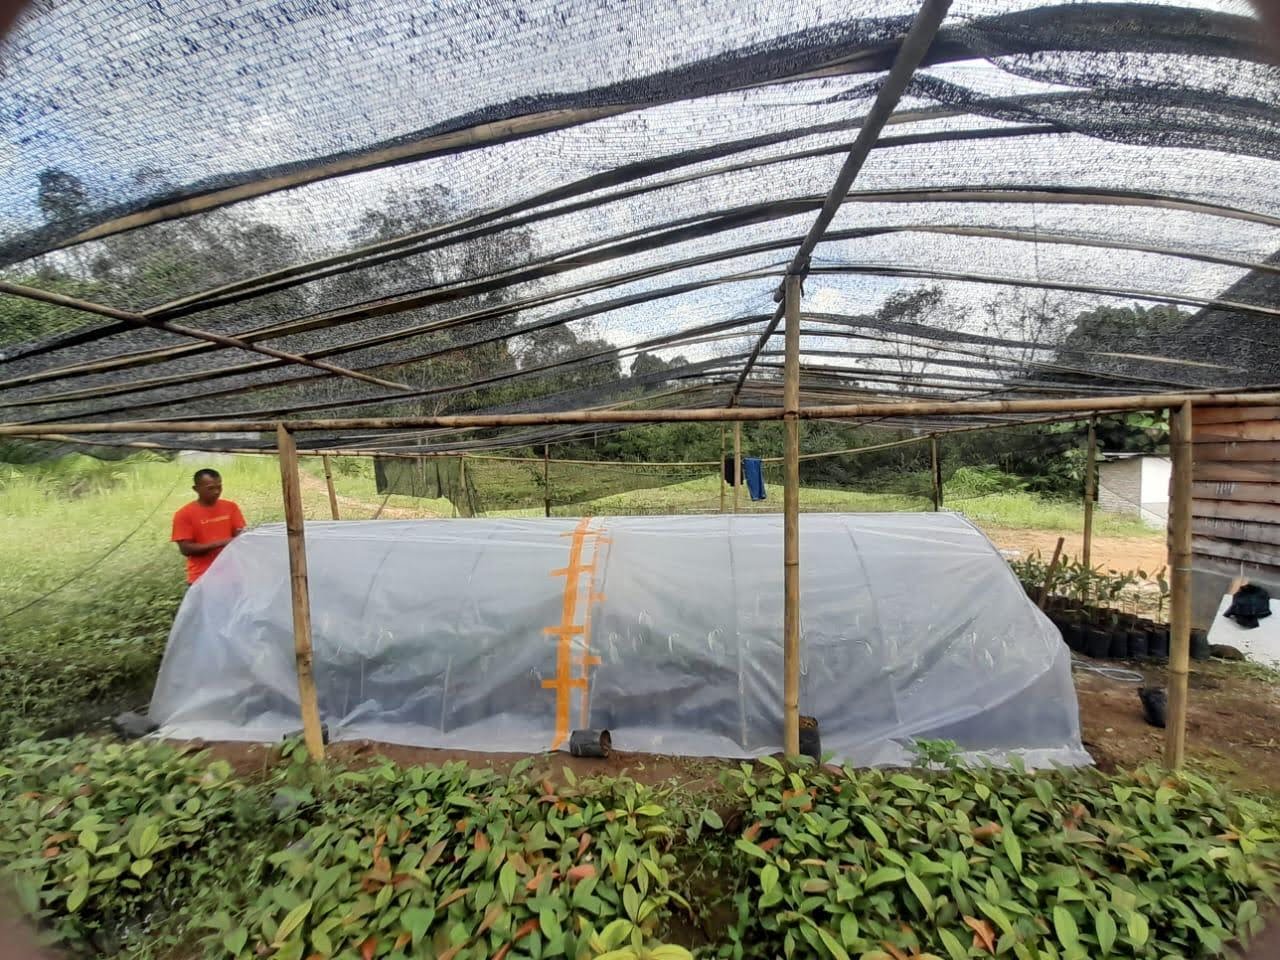 a community member stands beside a polytunnel in a nursery